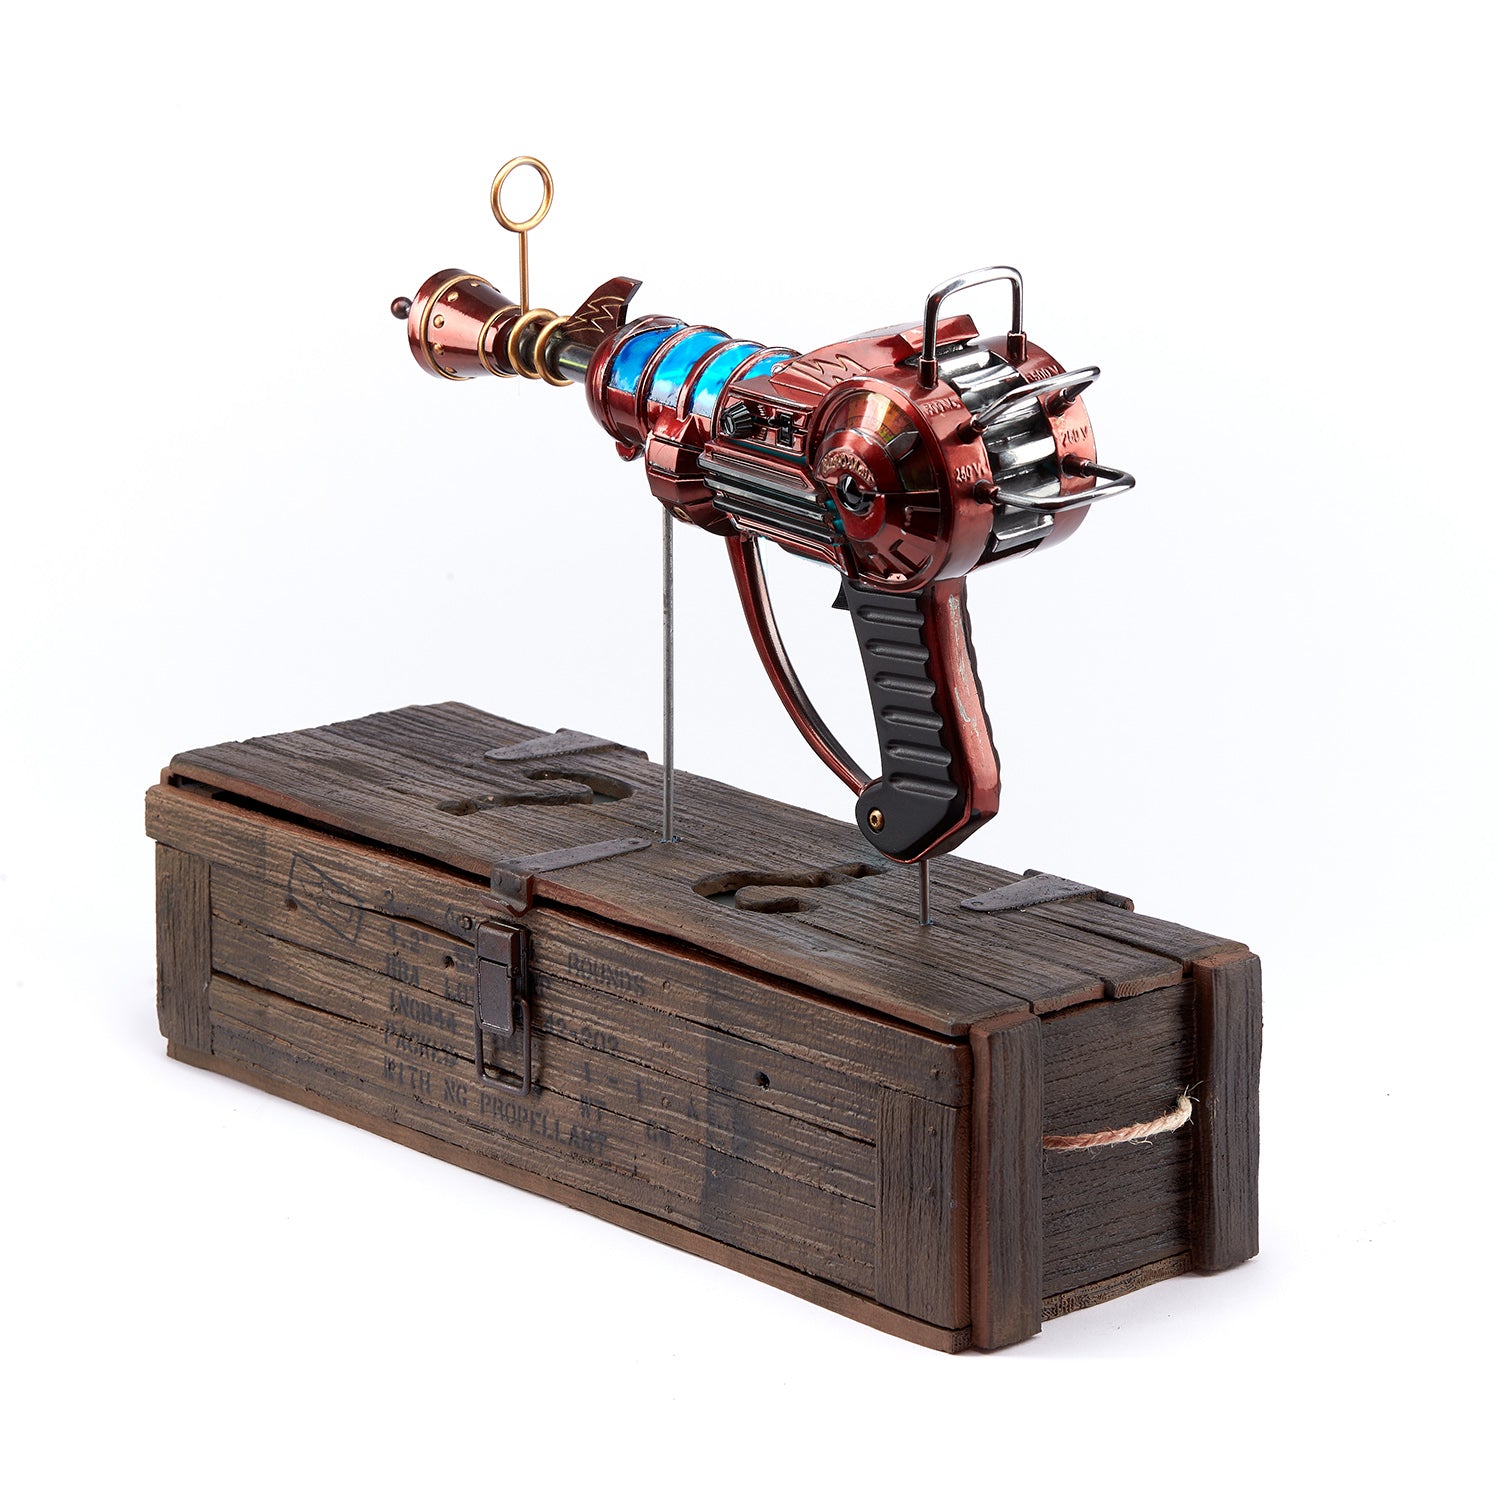 Call of Duty Ray Gun Statue - Back Left Side View